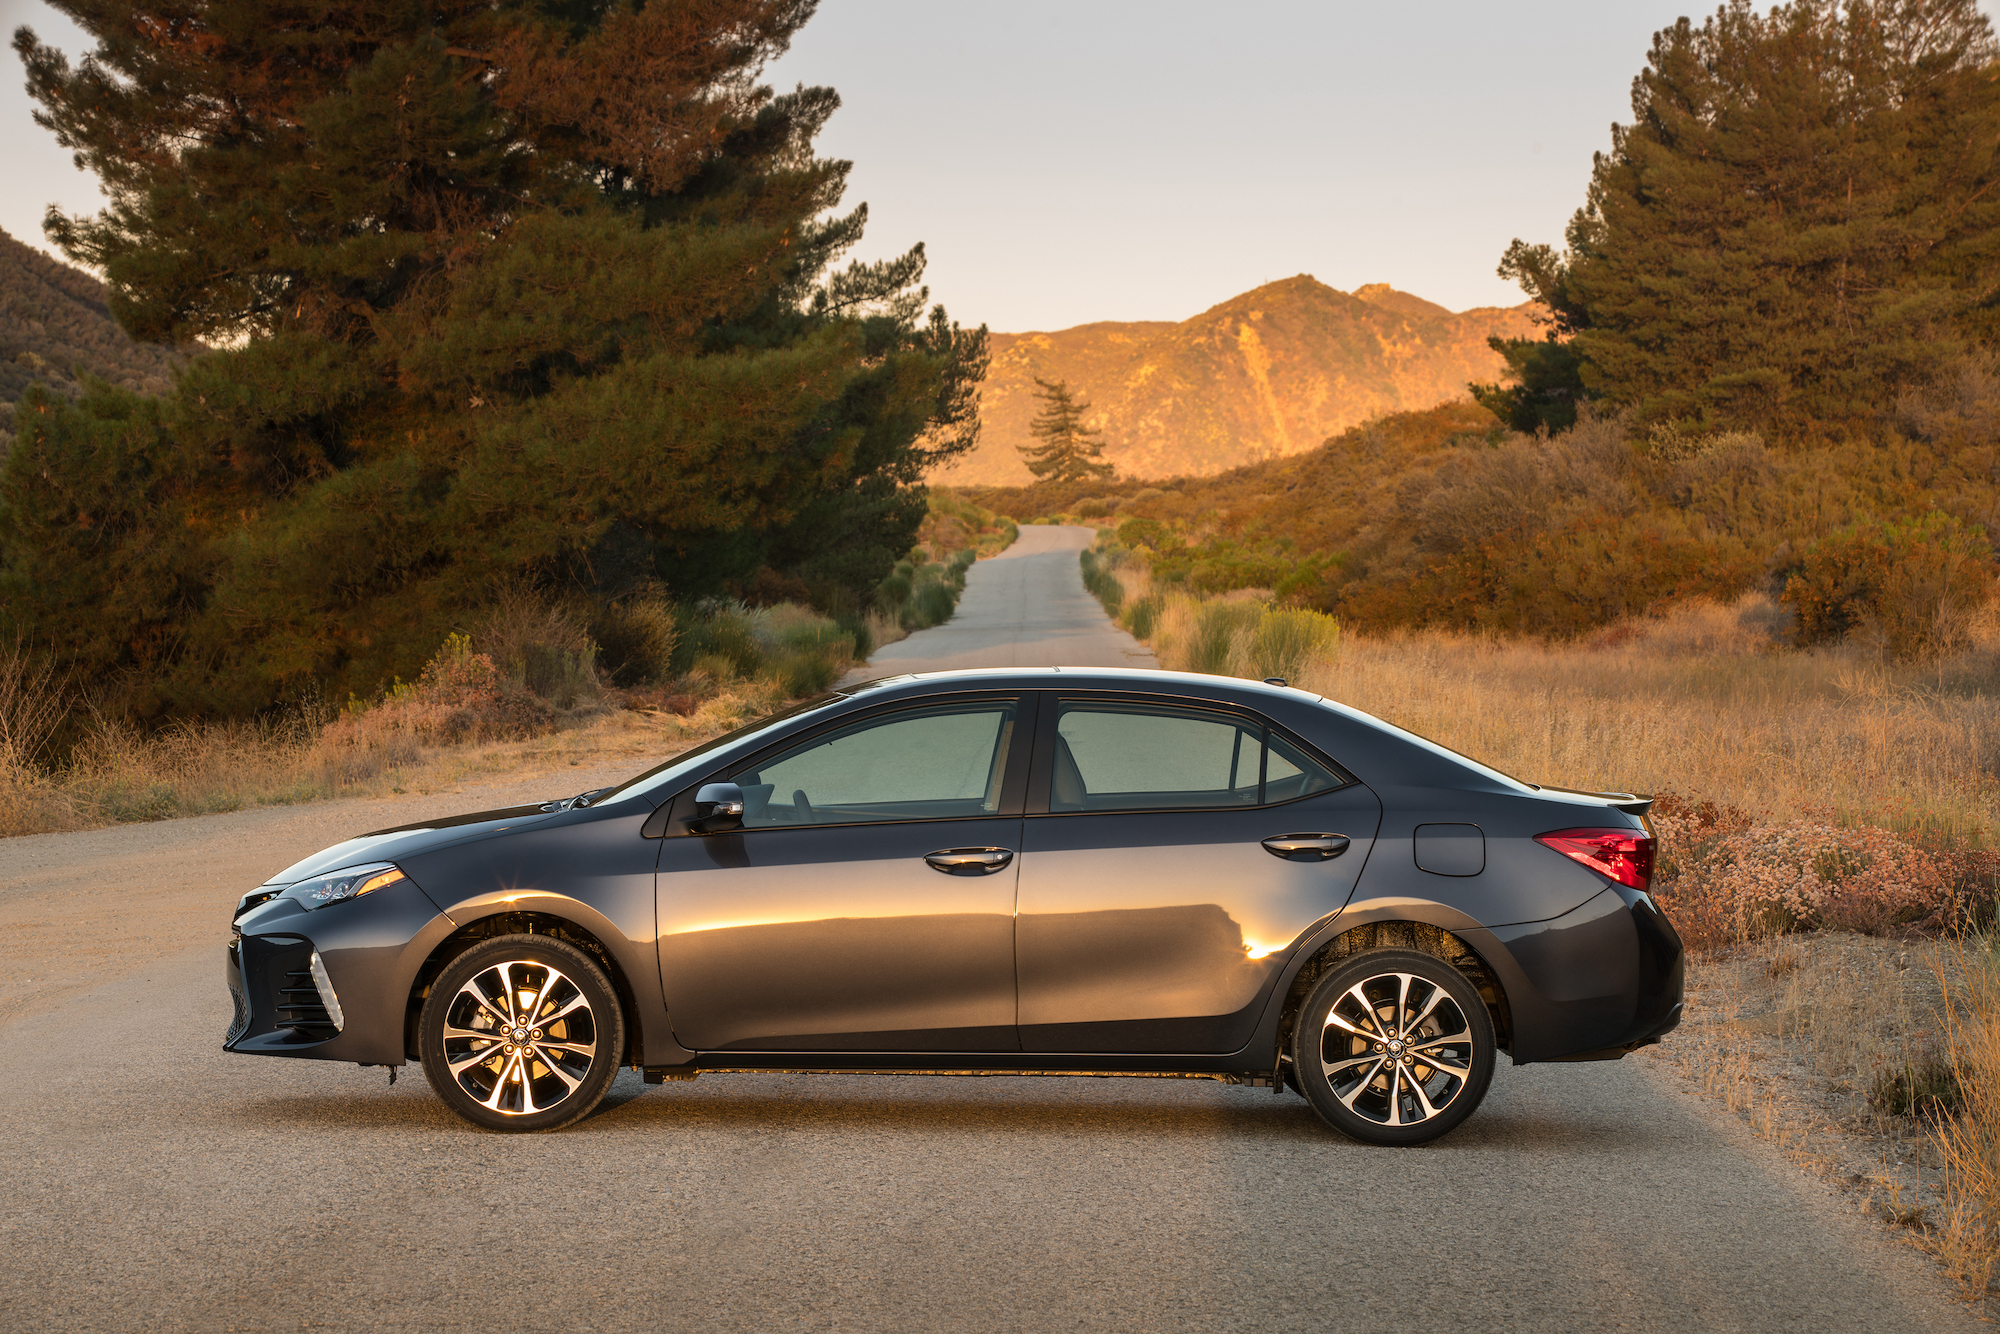 A dark gray metallic 2018 Toyota Corolla XSE parked on a country road surrounded by pine trees and mountains